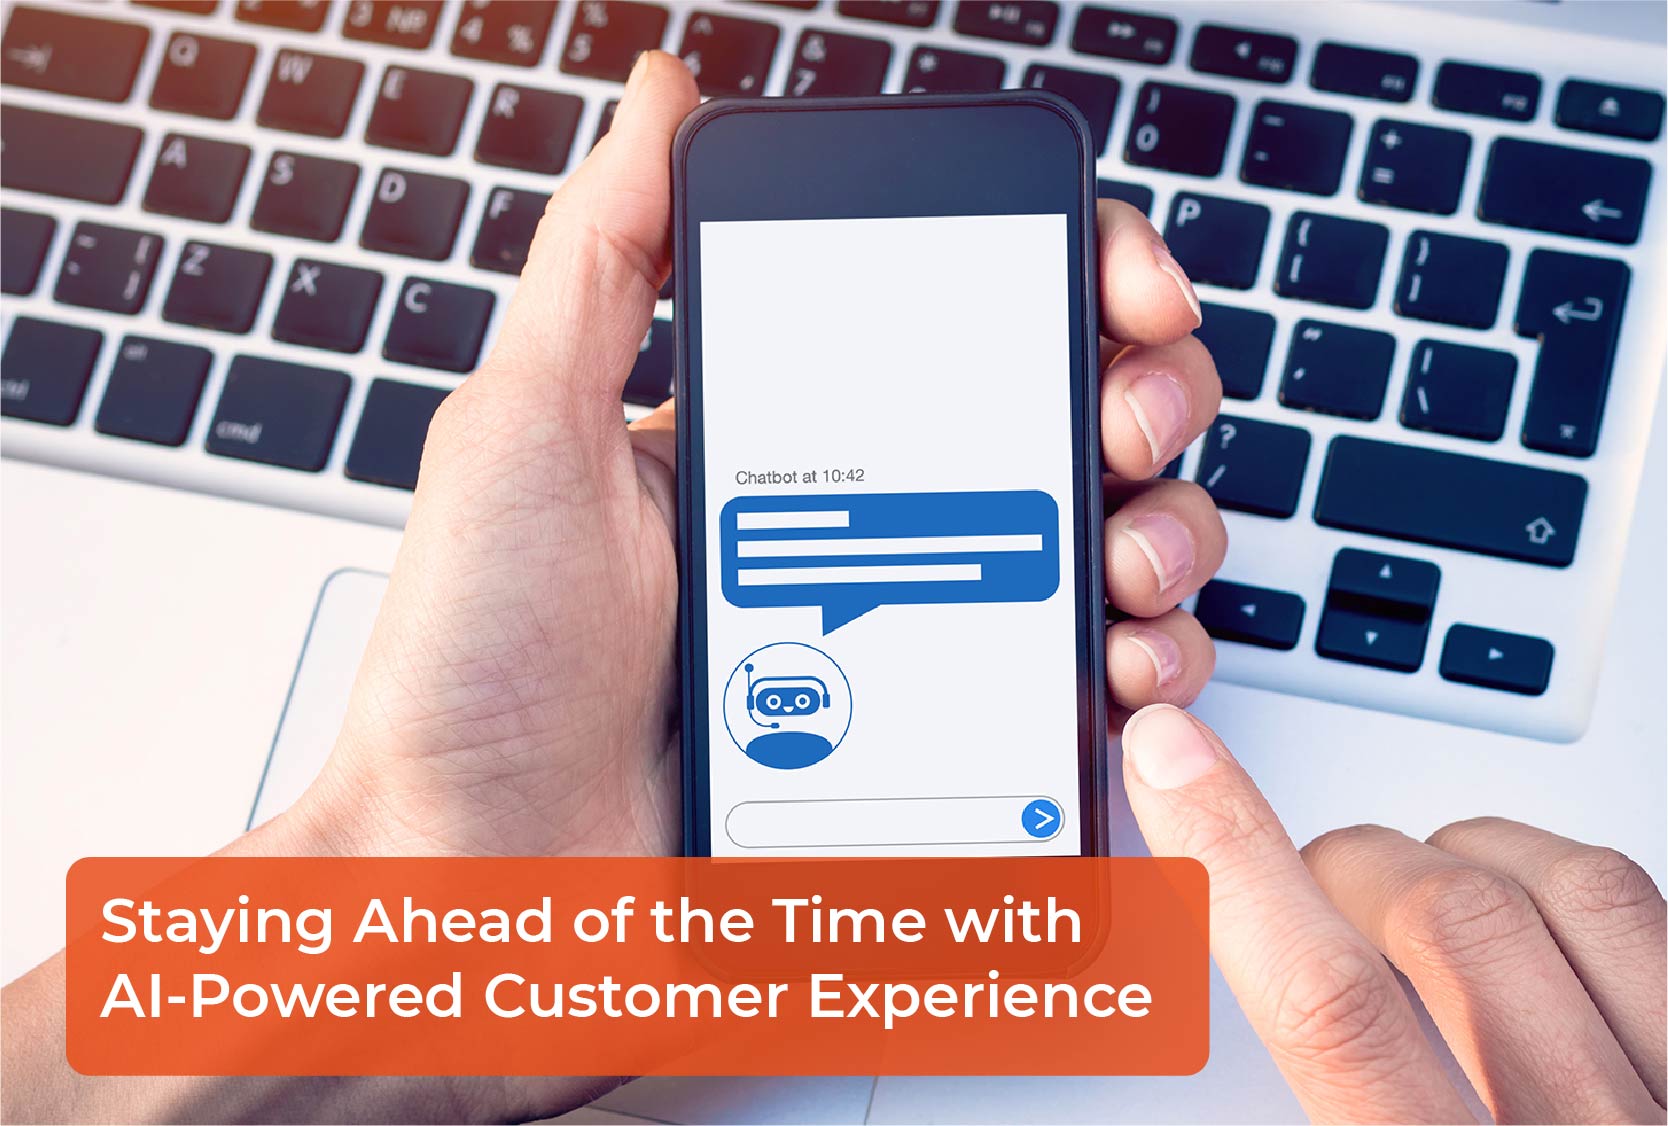 Staying Ahead of the Time with AI-Powered Customer Experience